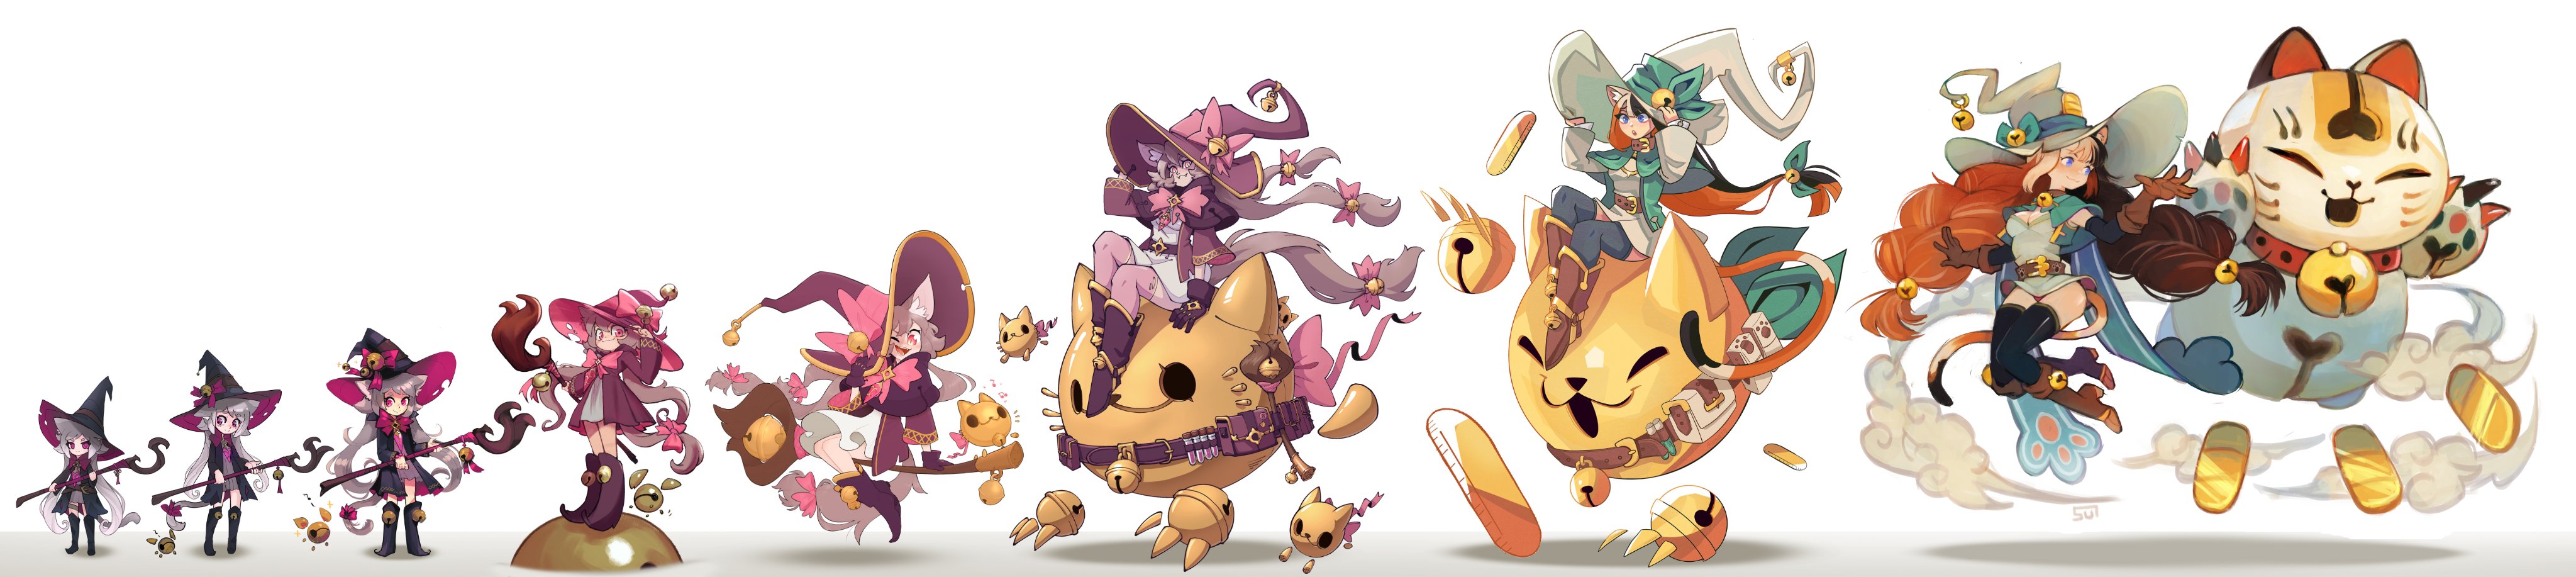 This drawing evolution example transforms the tiny witch into a friendly enchantress with a giant calico cat familiar